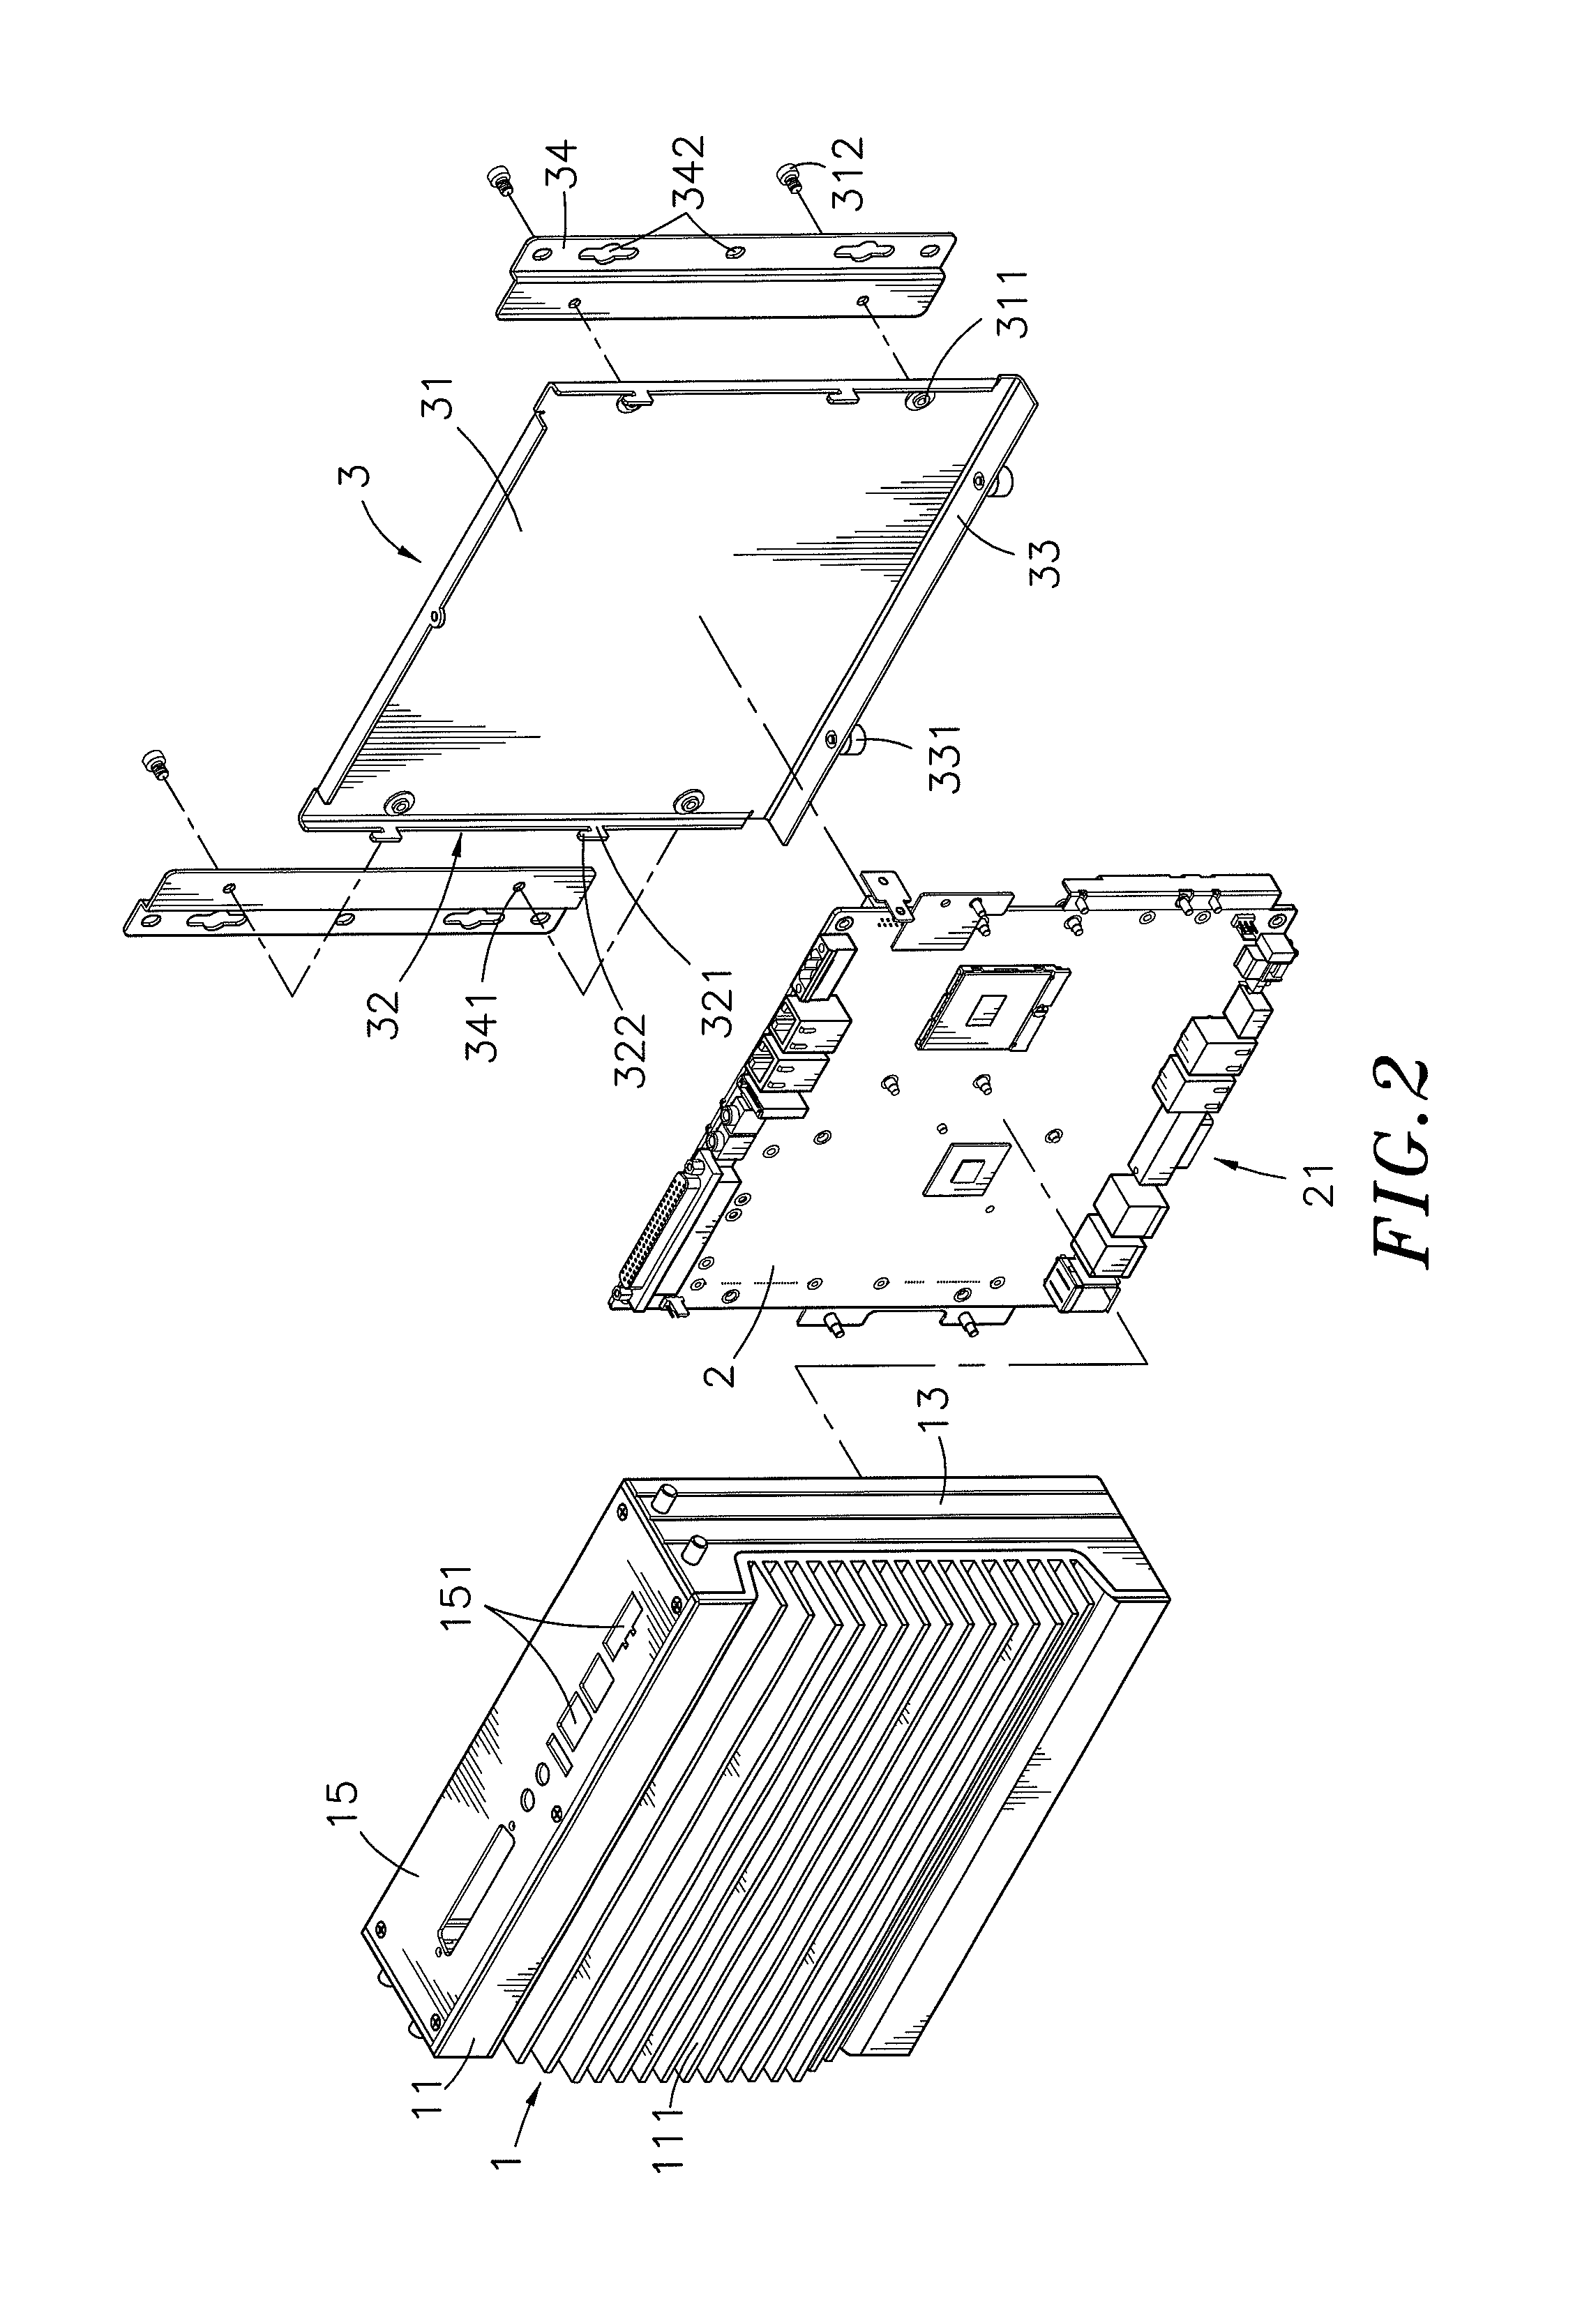 Wall-mounting structure for wall-mounted electronic device